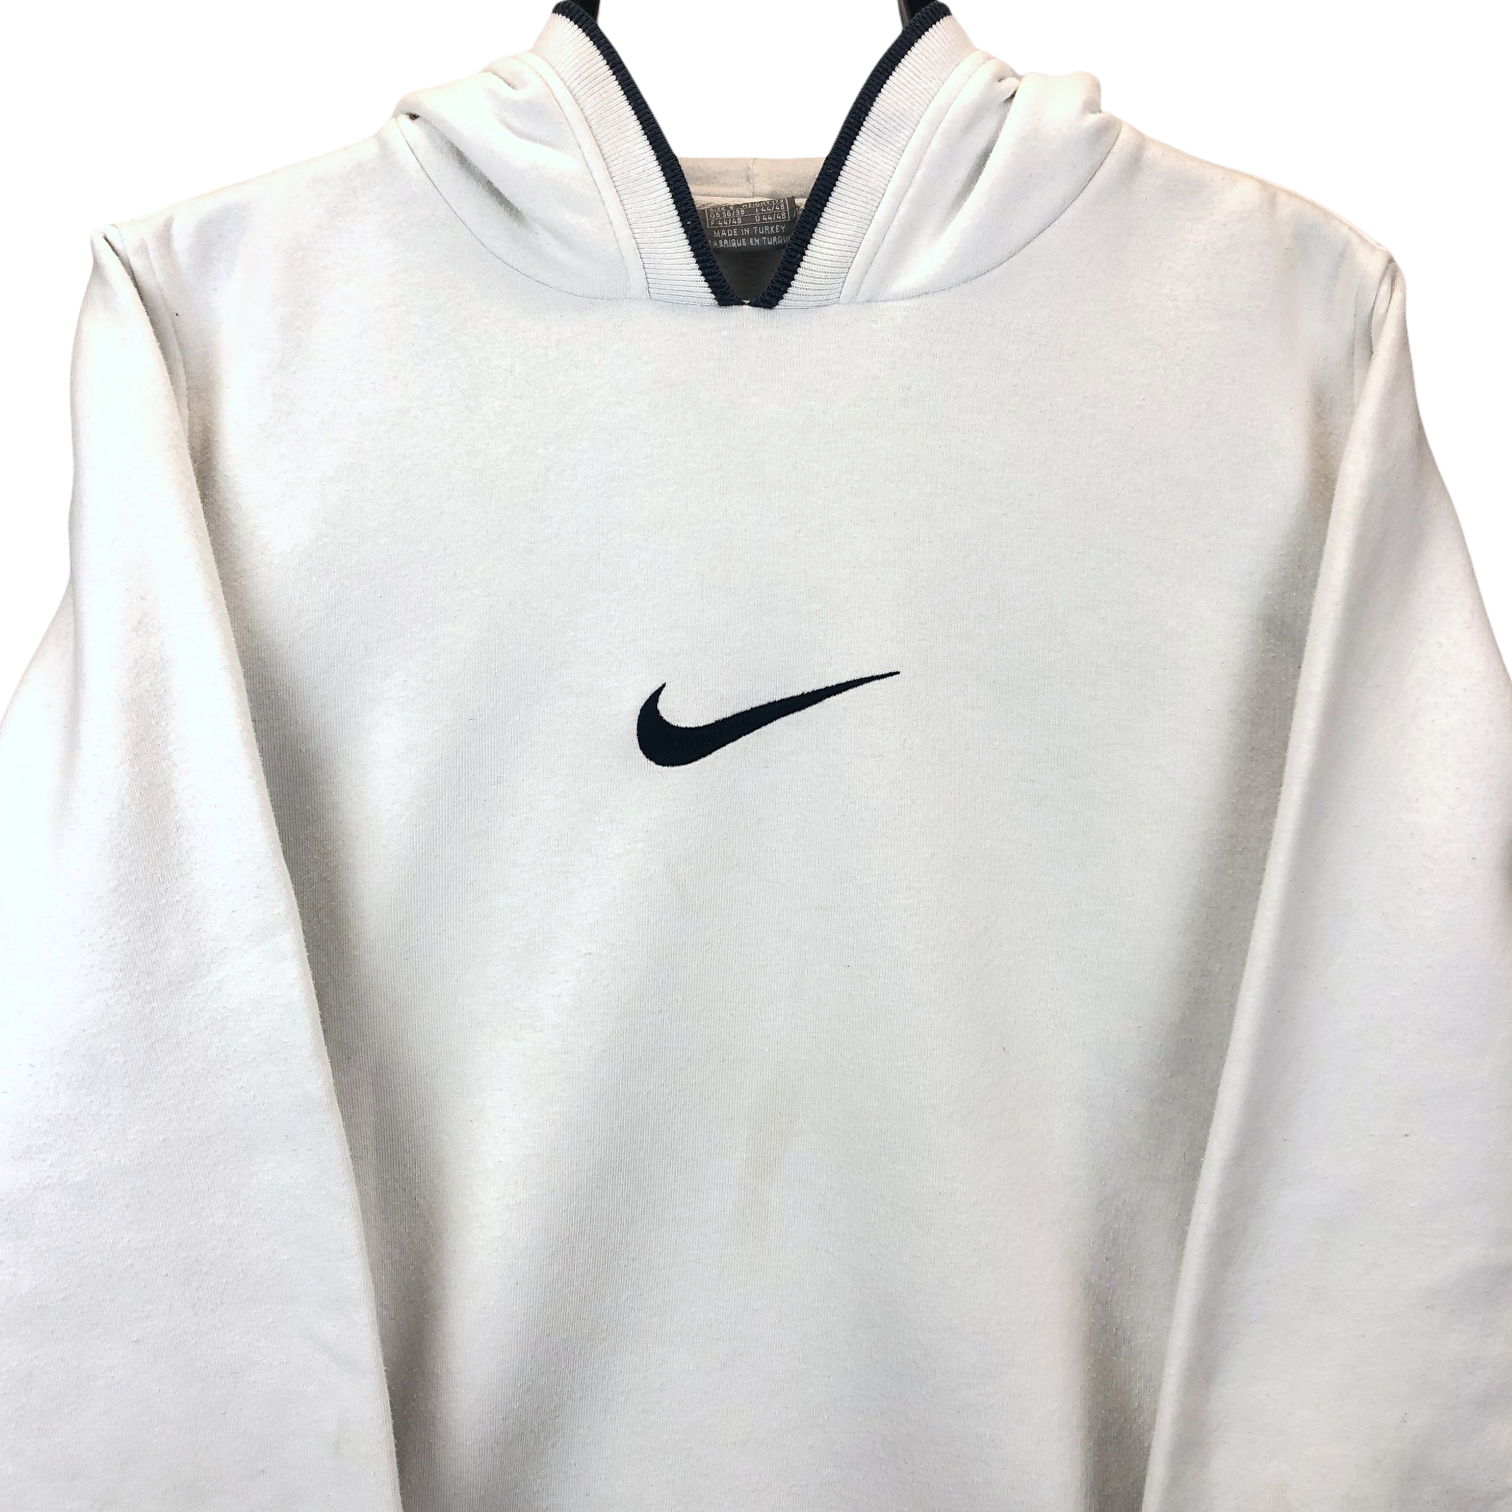 VINTAGE NIKE EMBROIDERED CENTRE SWOOSH HOODIE IN WHITE AND NAVY - MEN'S XS/WOMEN'S SMALL